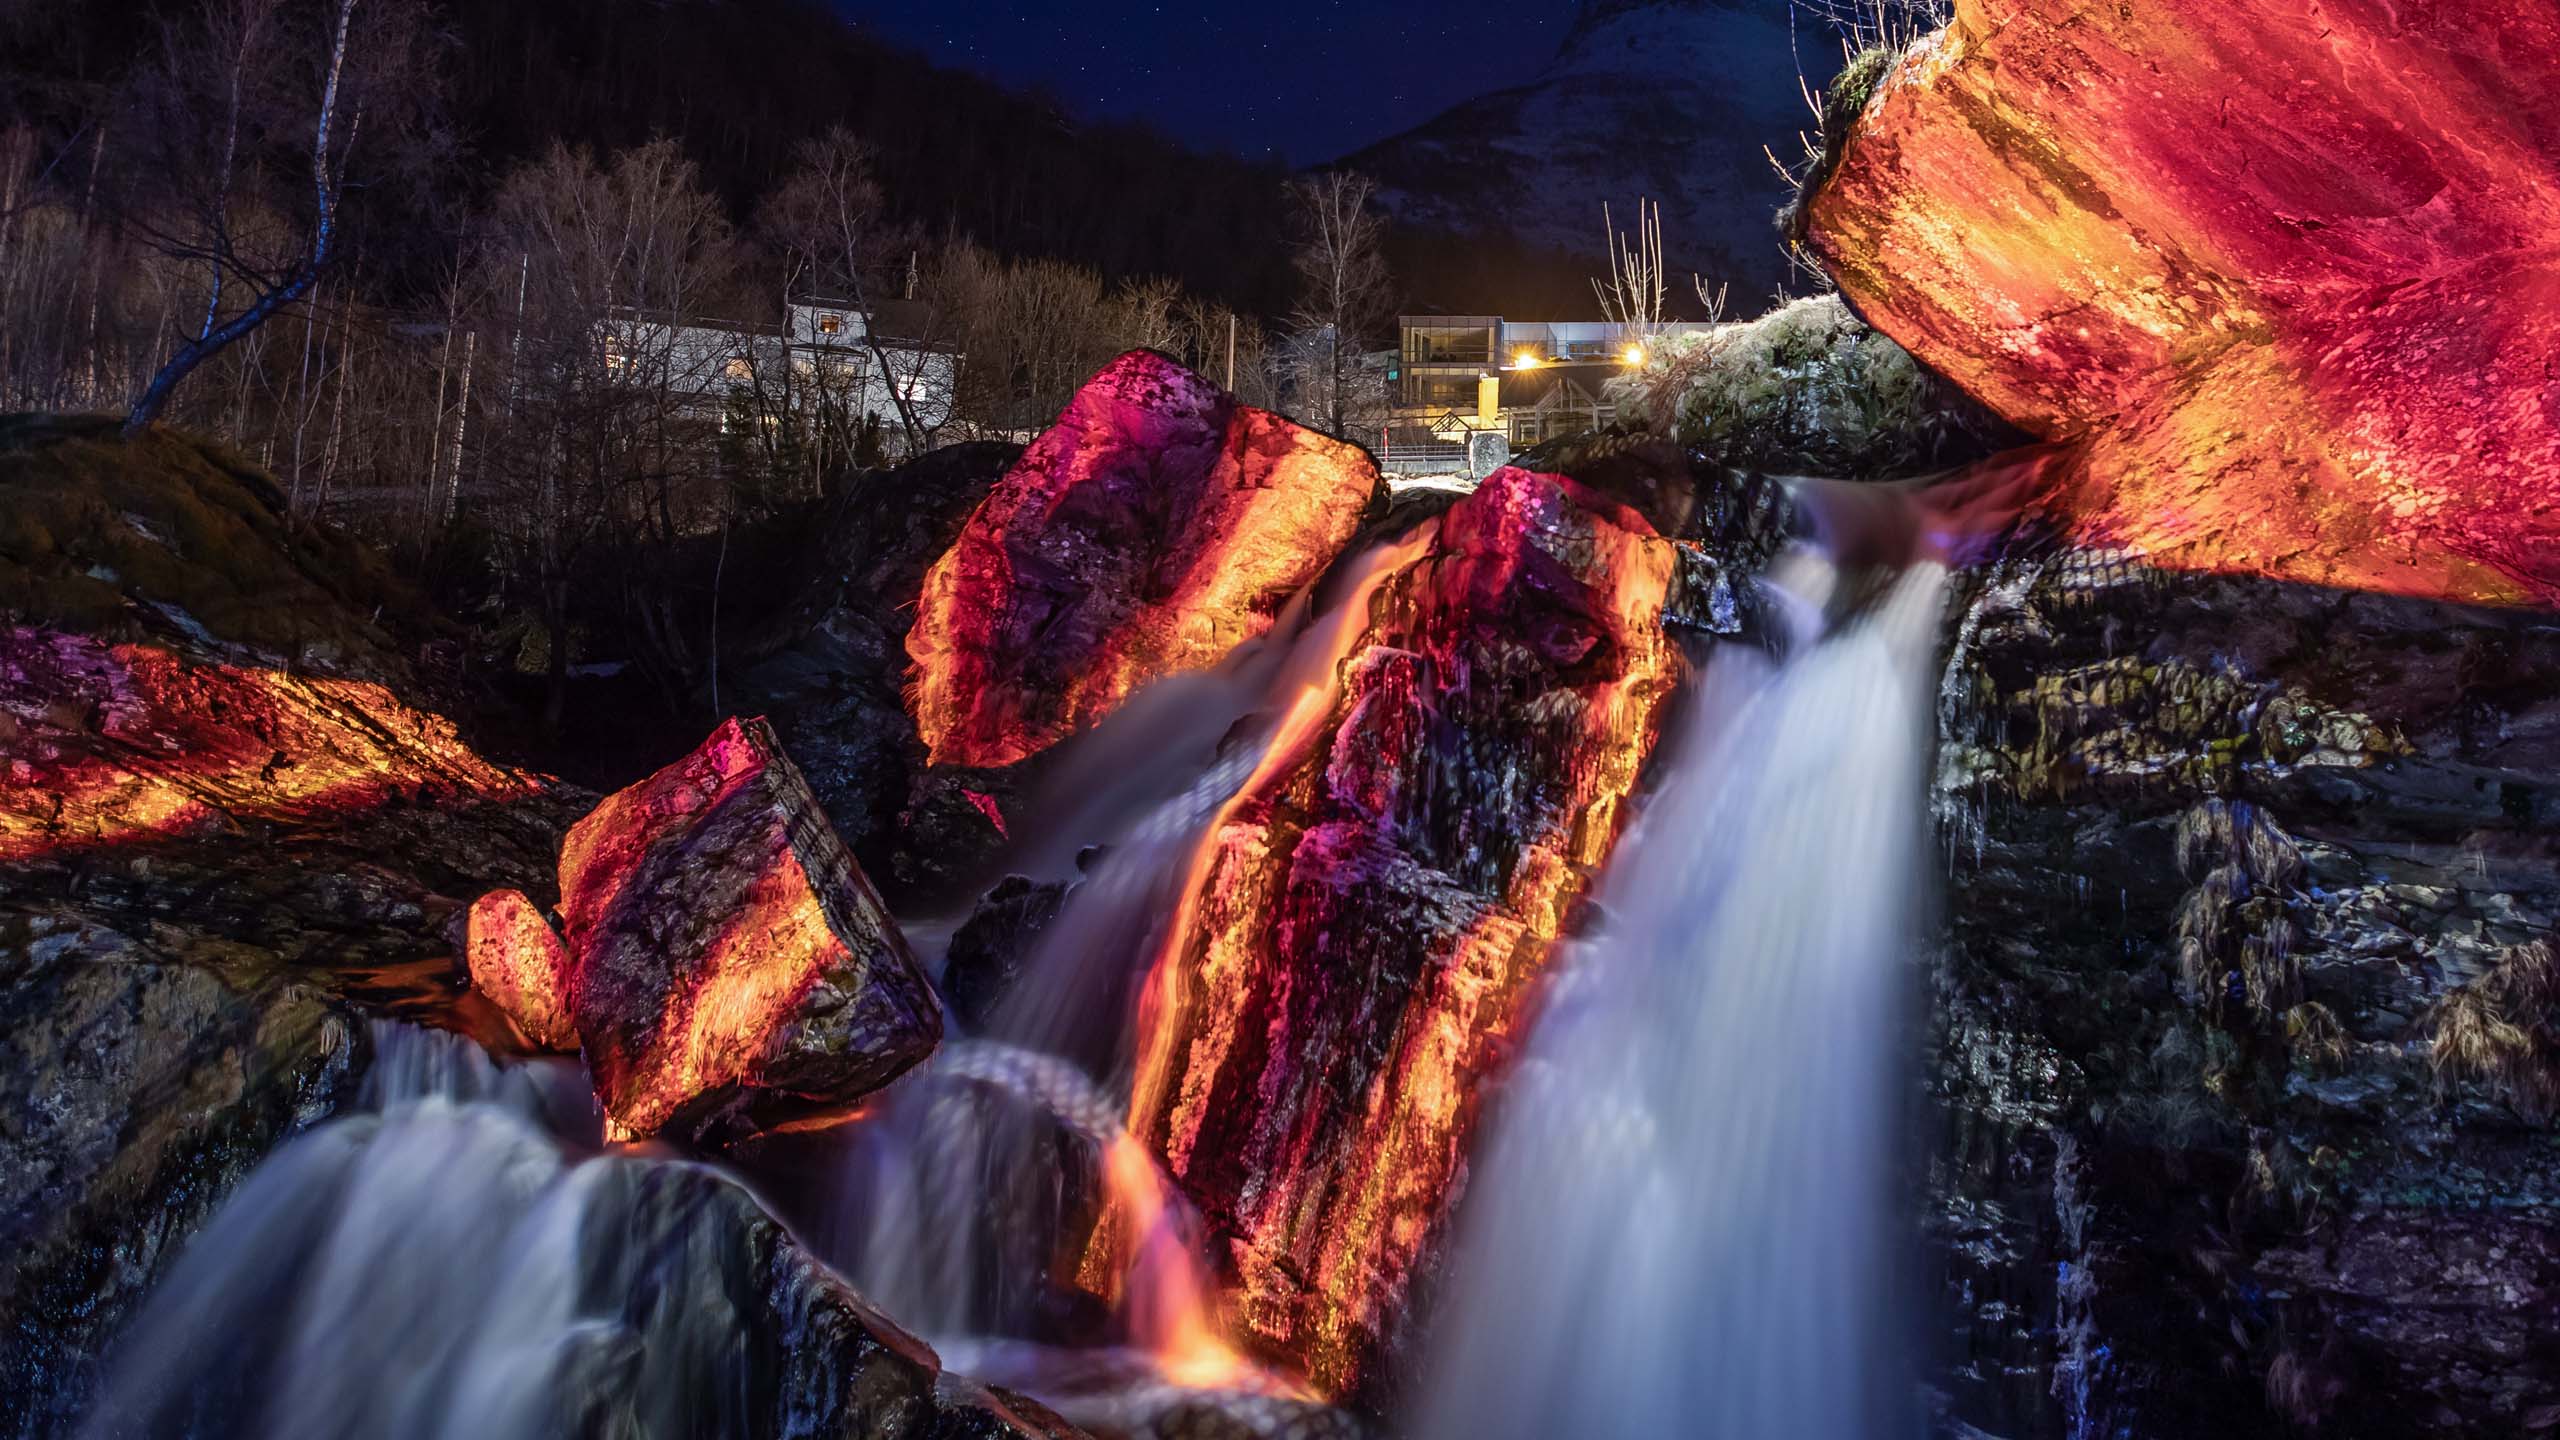 Rocks and a waterfall with a video-mapping installation showing fire and lava visuals